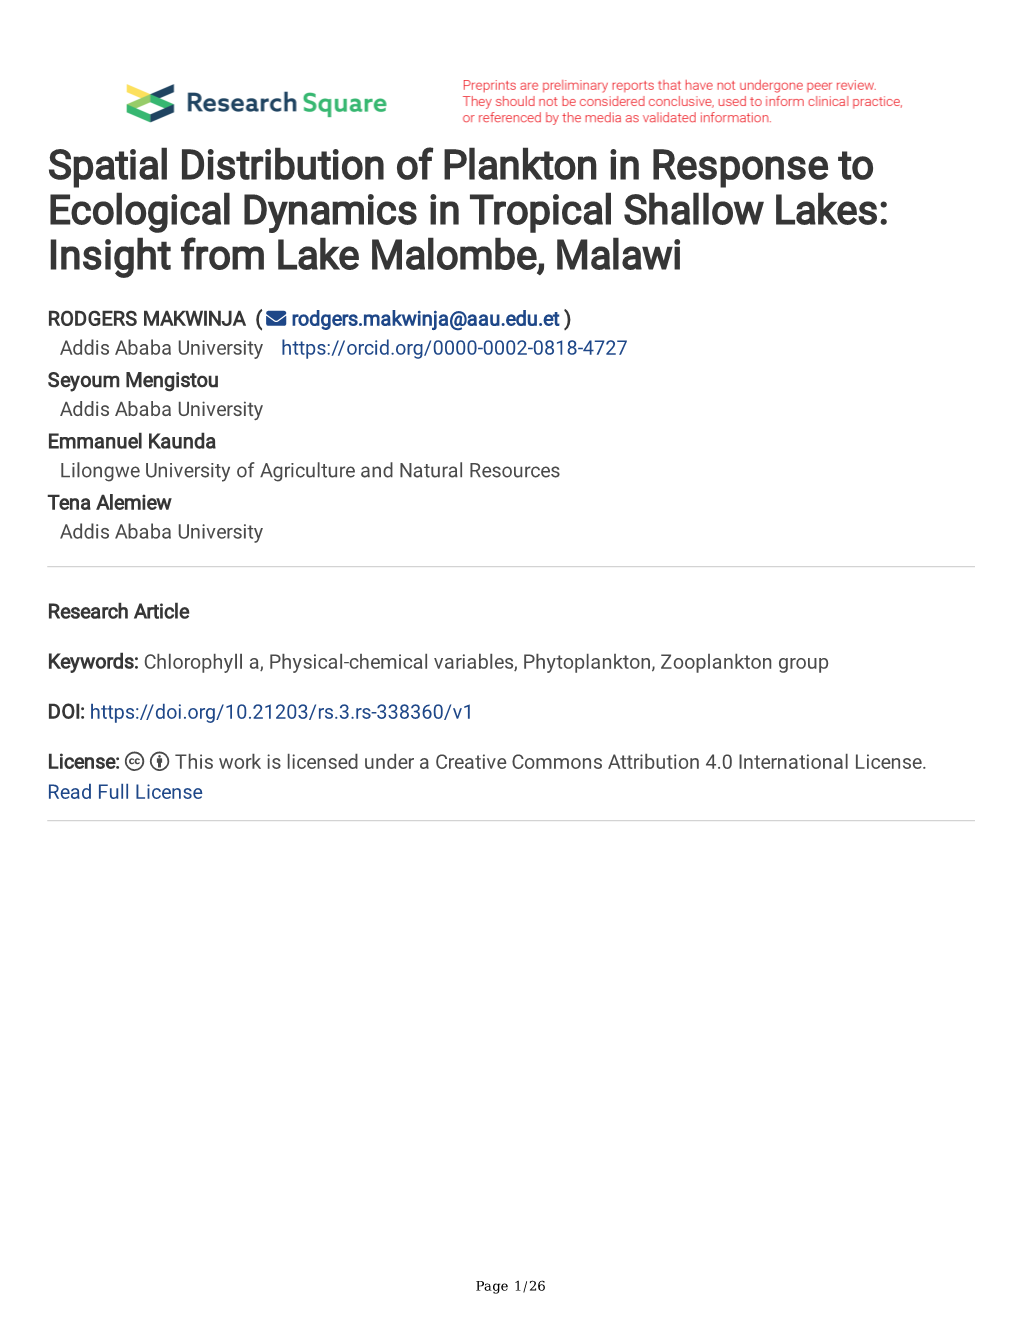 Spatial Distribution of Plankton in Response to Ecological Dynamics in Tropical Shallow Lakes: Insight from Lake Malombe, Malawi